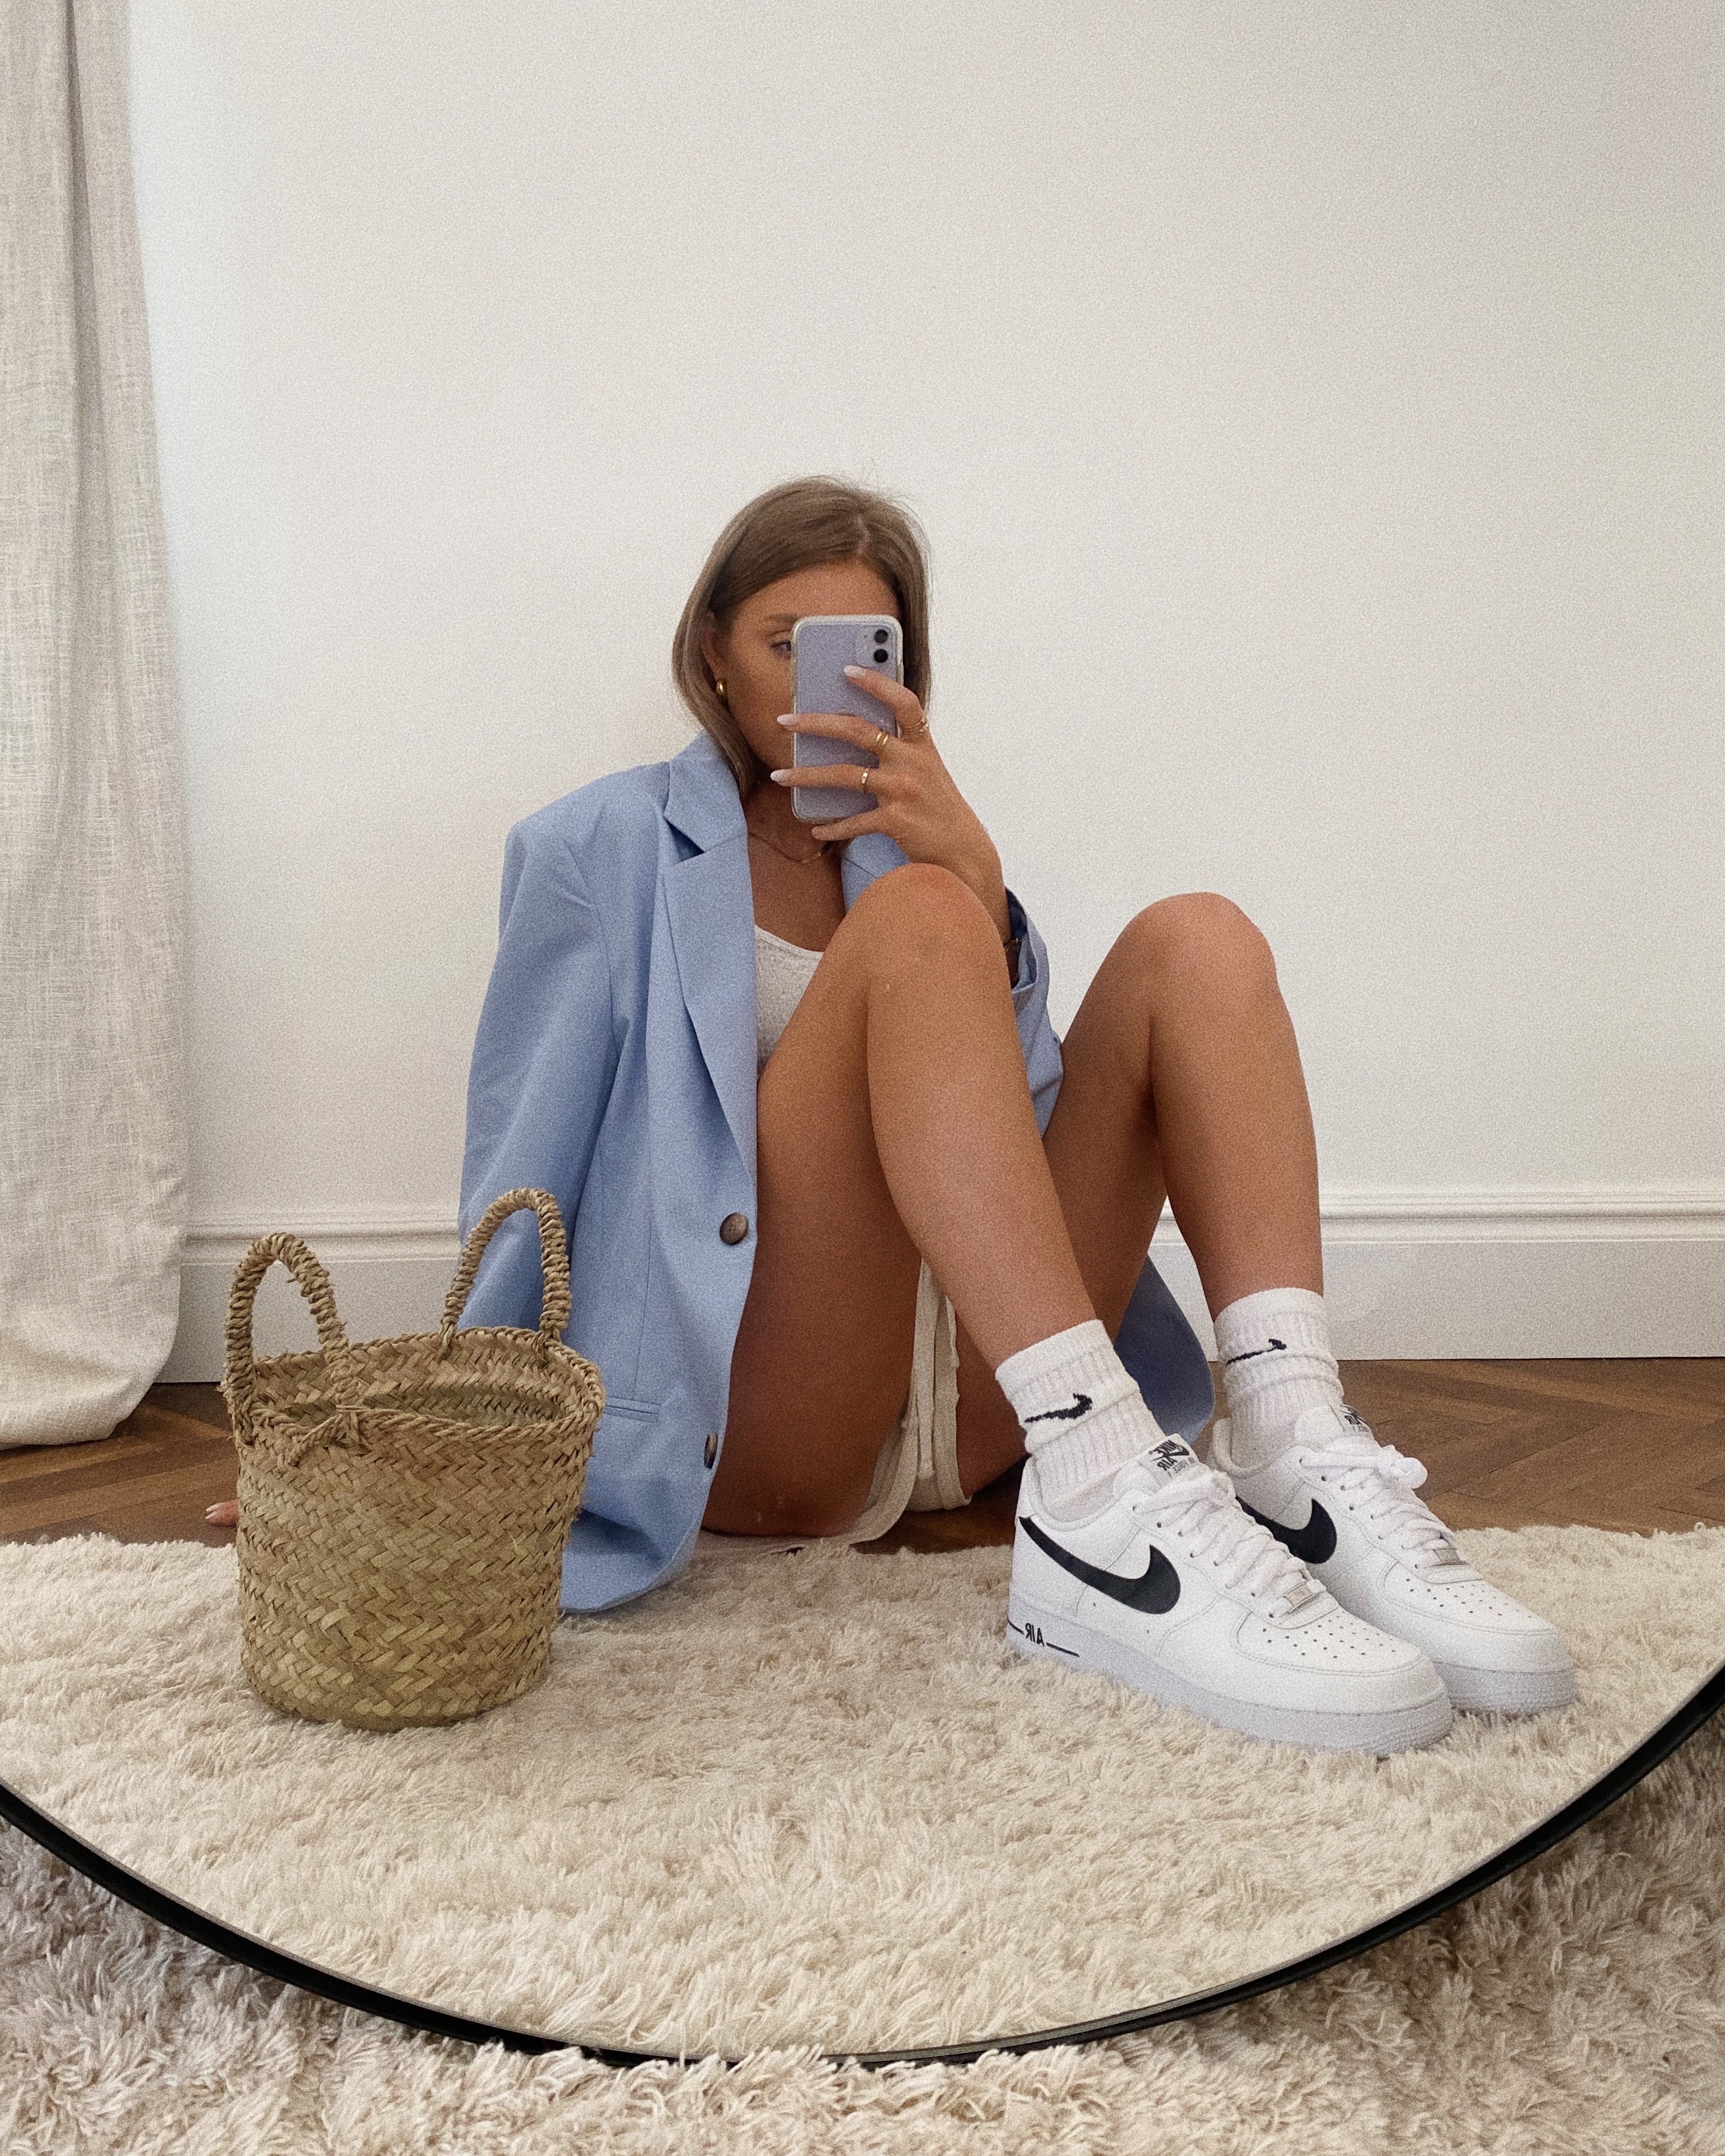 10 Easy Ways To Style Nike Air Force 1 This Summer – Love Style Mindfulness  – Fashion & Personal Style Blog